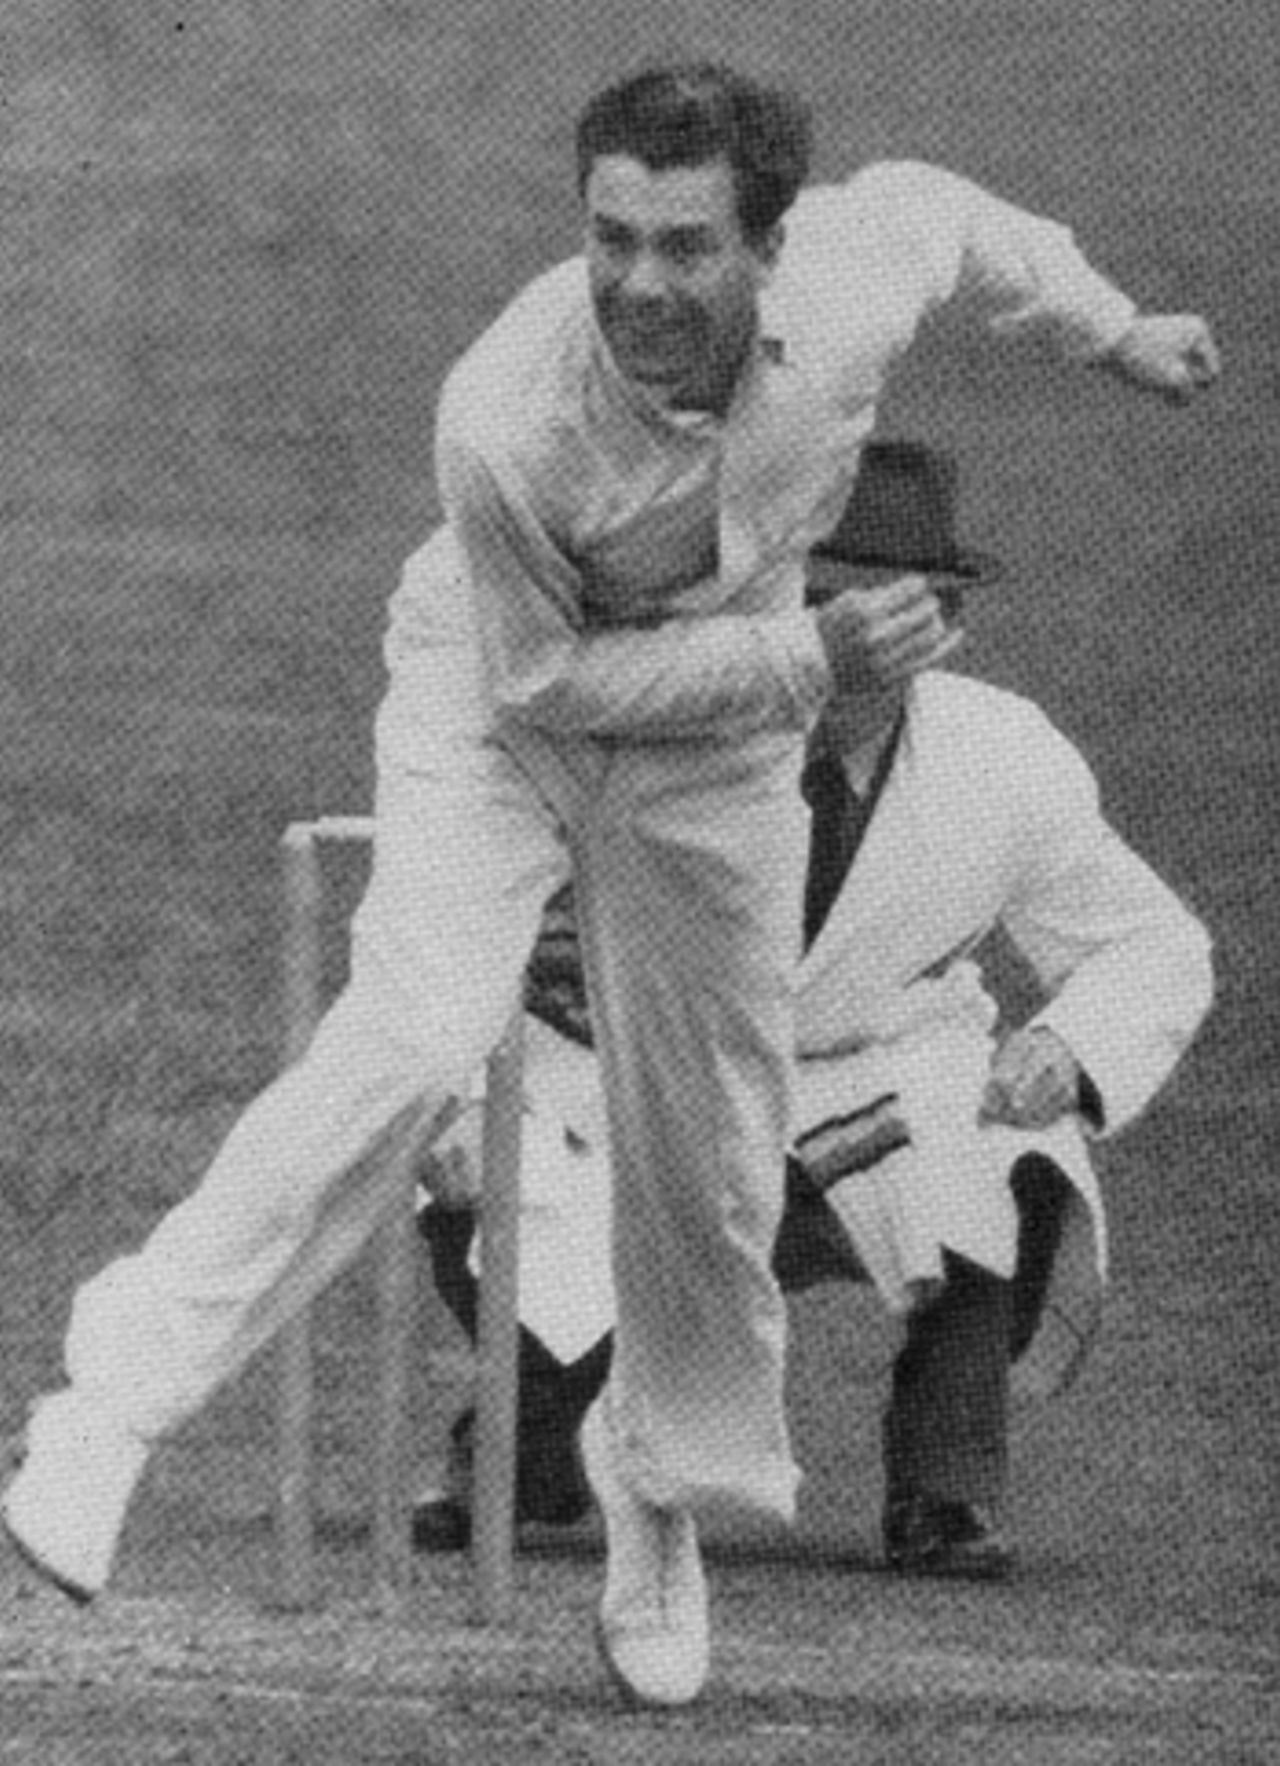 Doug Wright bowling against South Africa in 1947